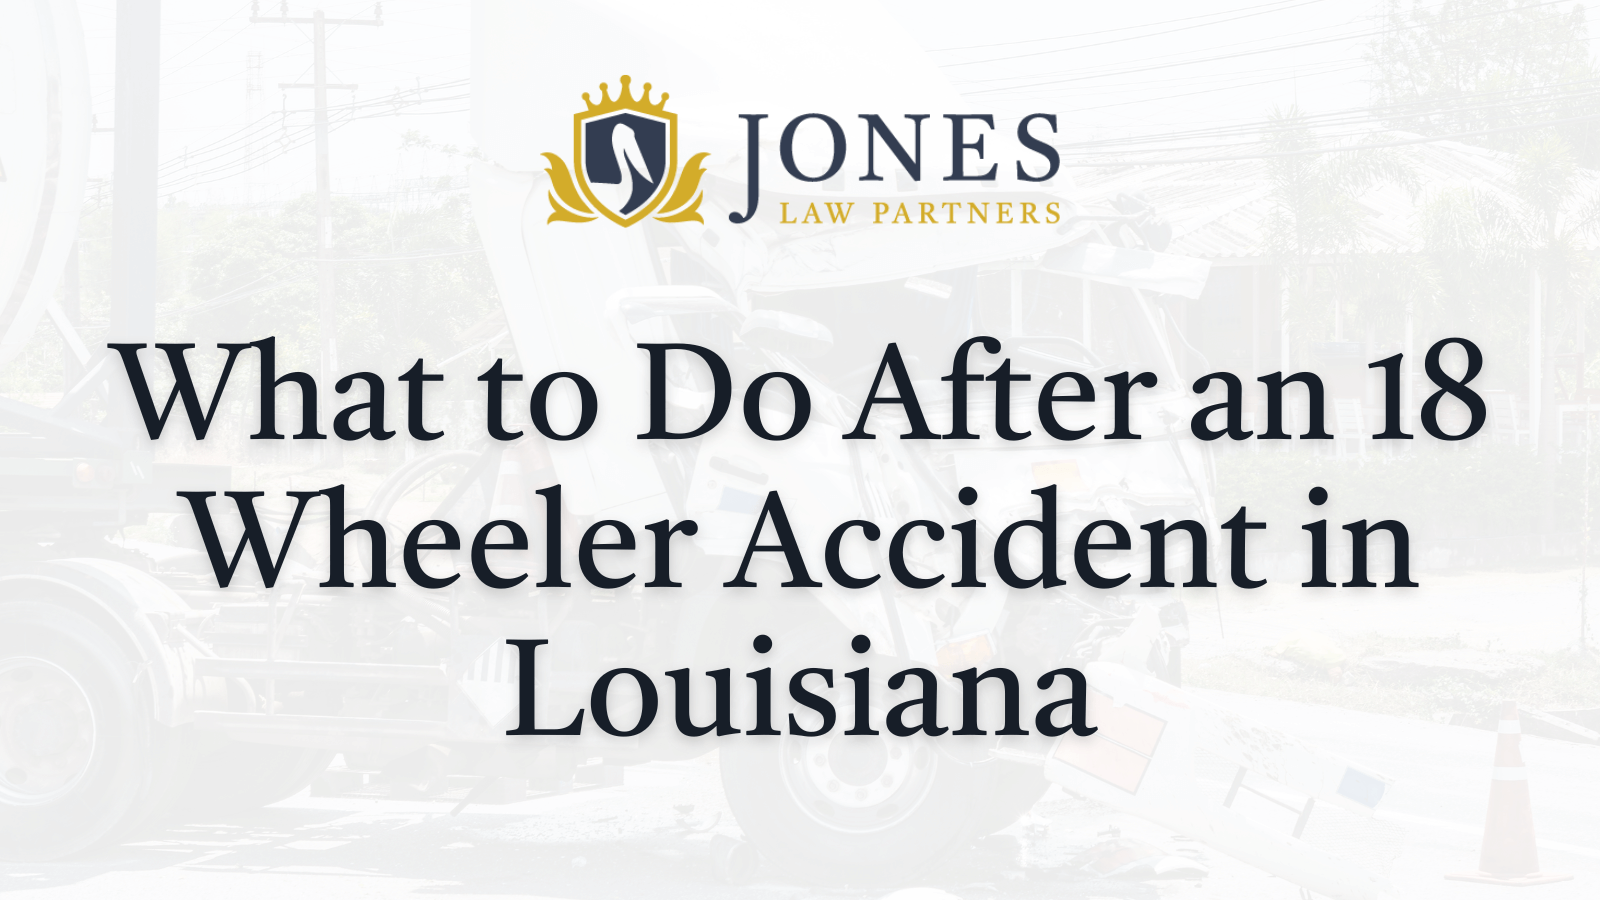 What to Do After an 18 Wheeler Accident in Louisiana - Jones Law Partners - alexandria louisiana